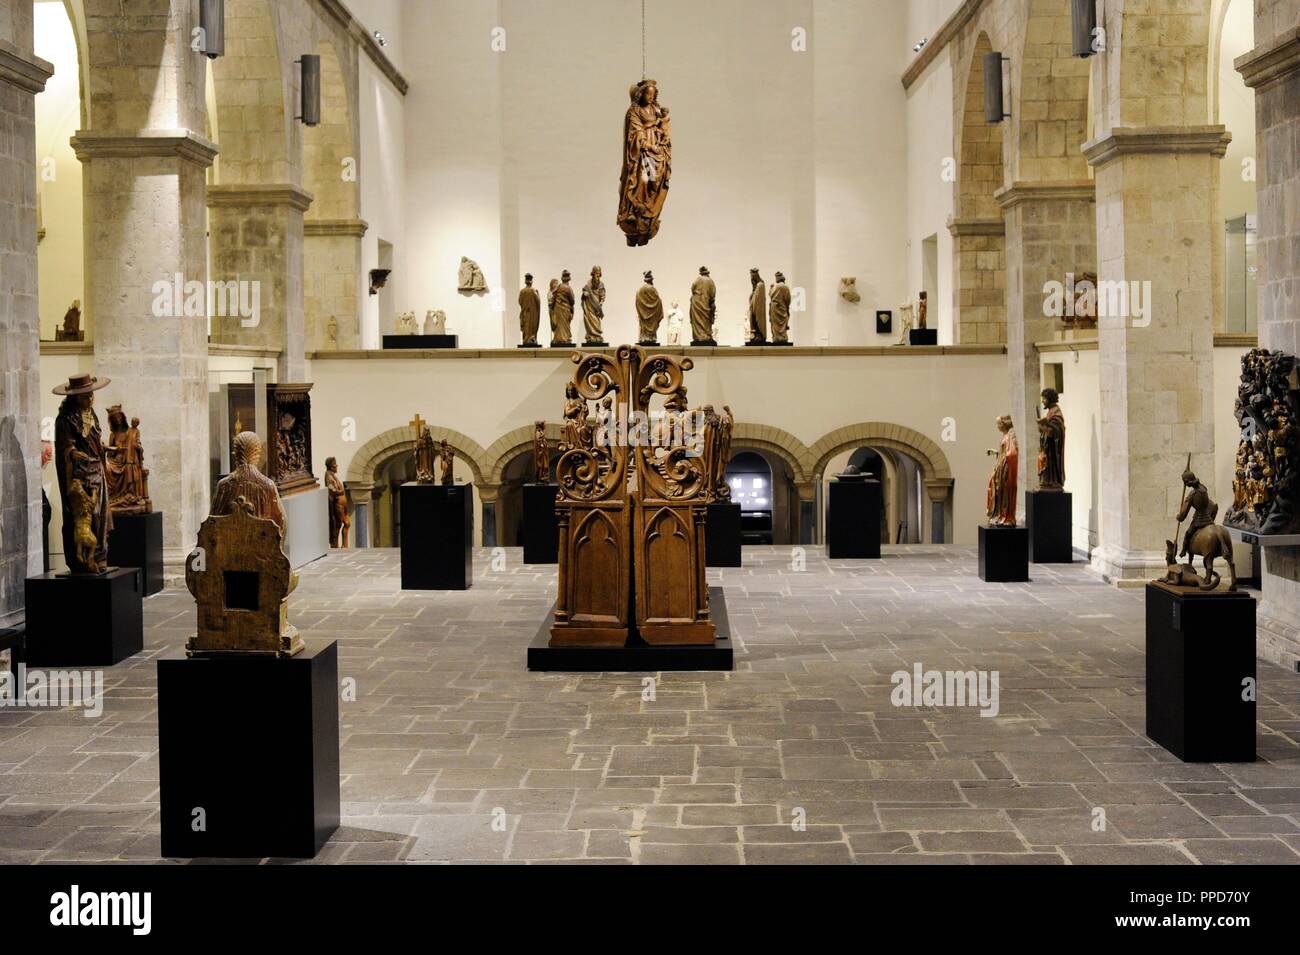 Schnu_tgen Museum. Interior view of the old Romanesque church where the museum is located. Cologne, Germany. Stock Photo